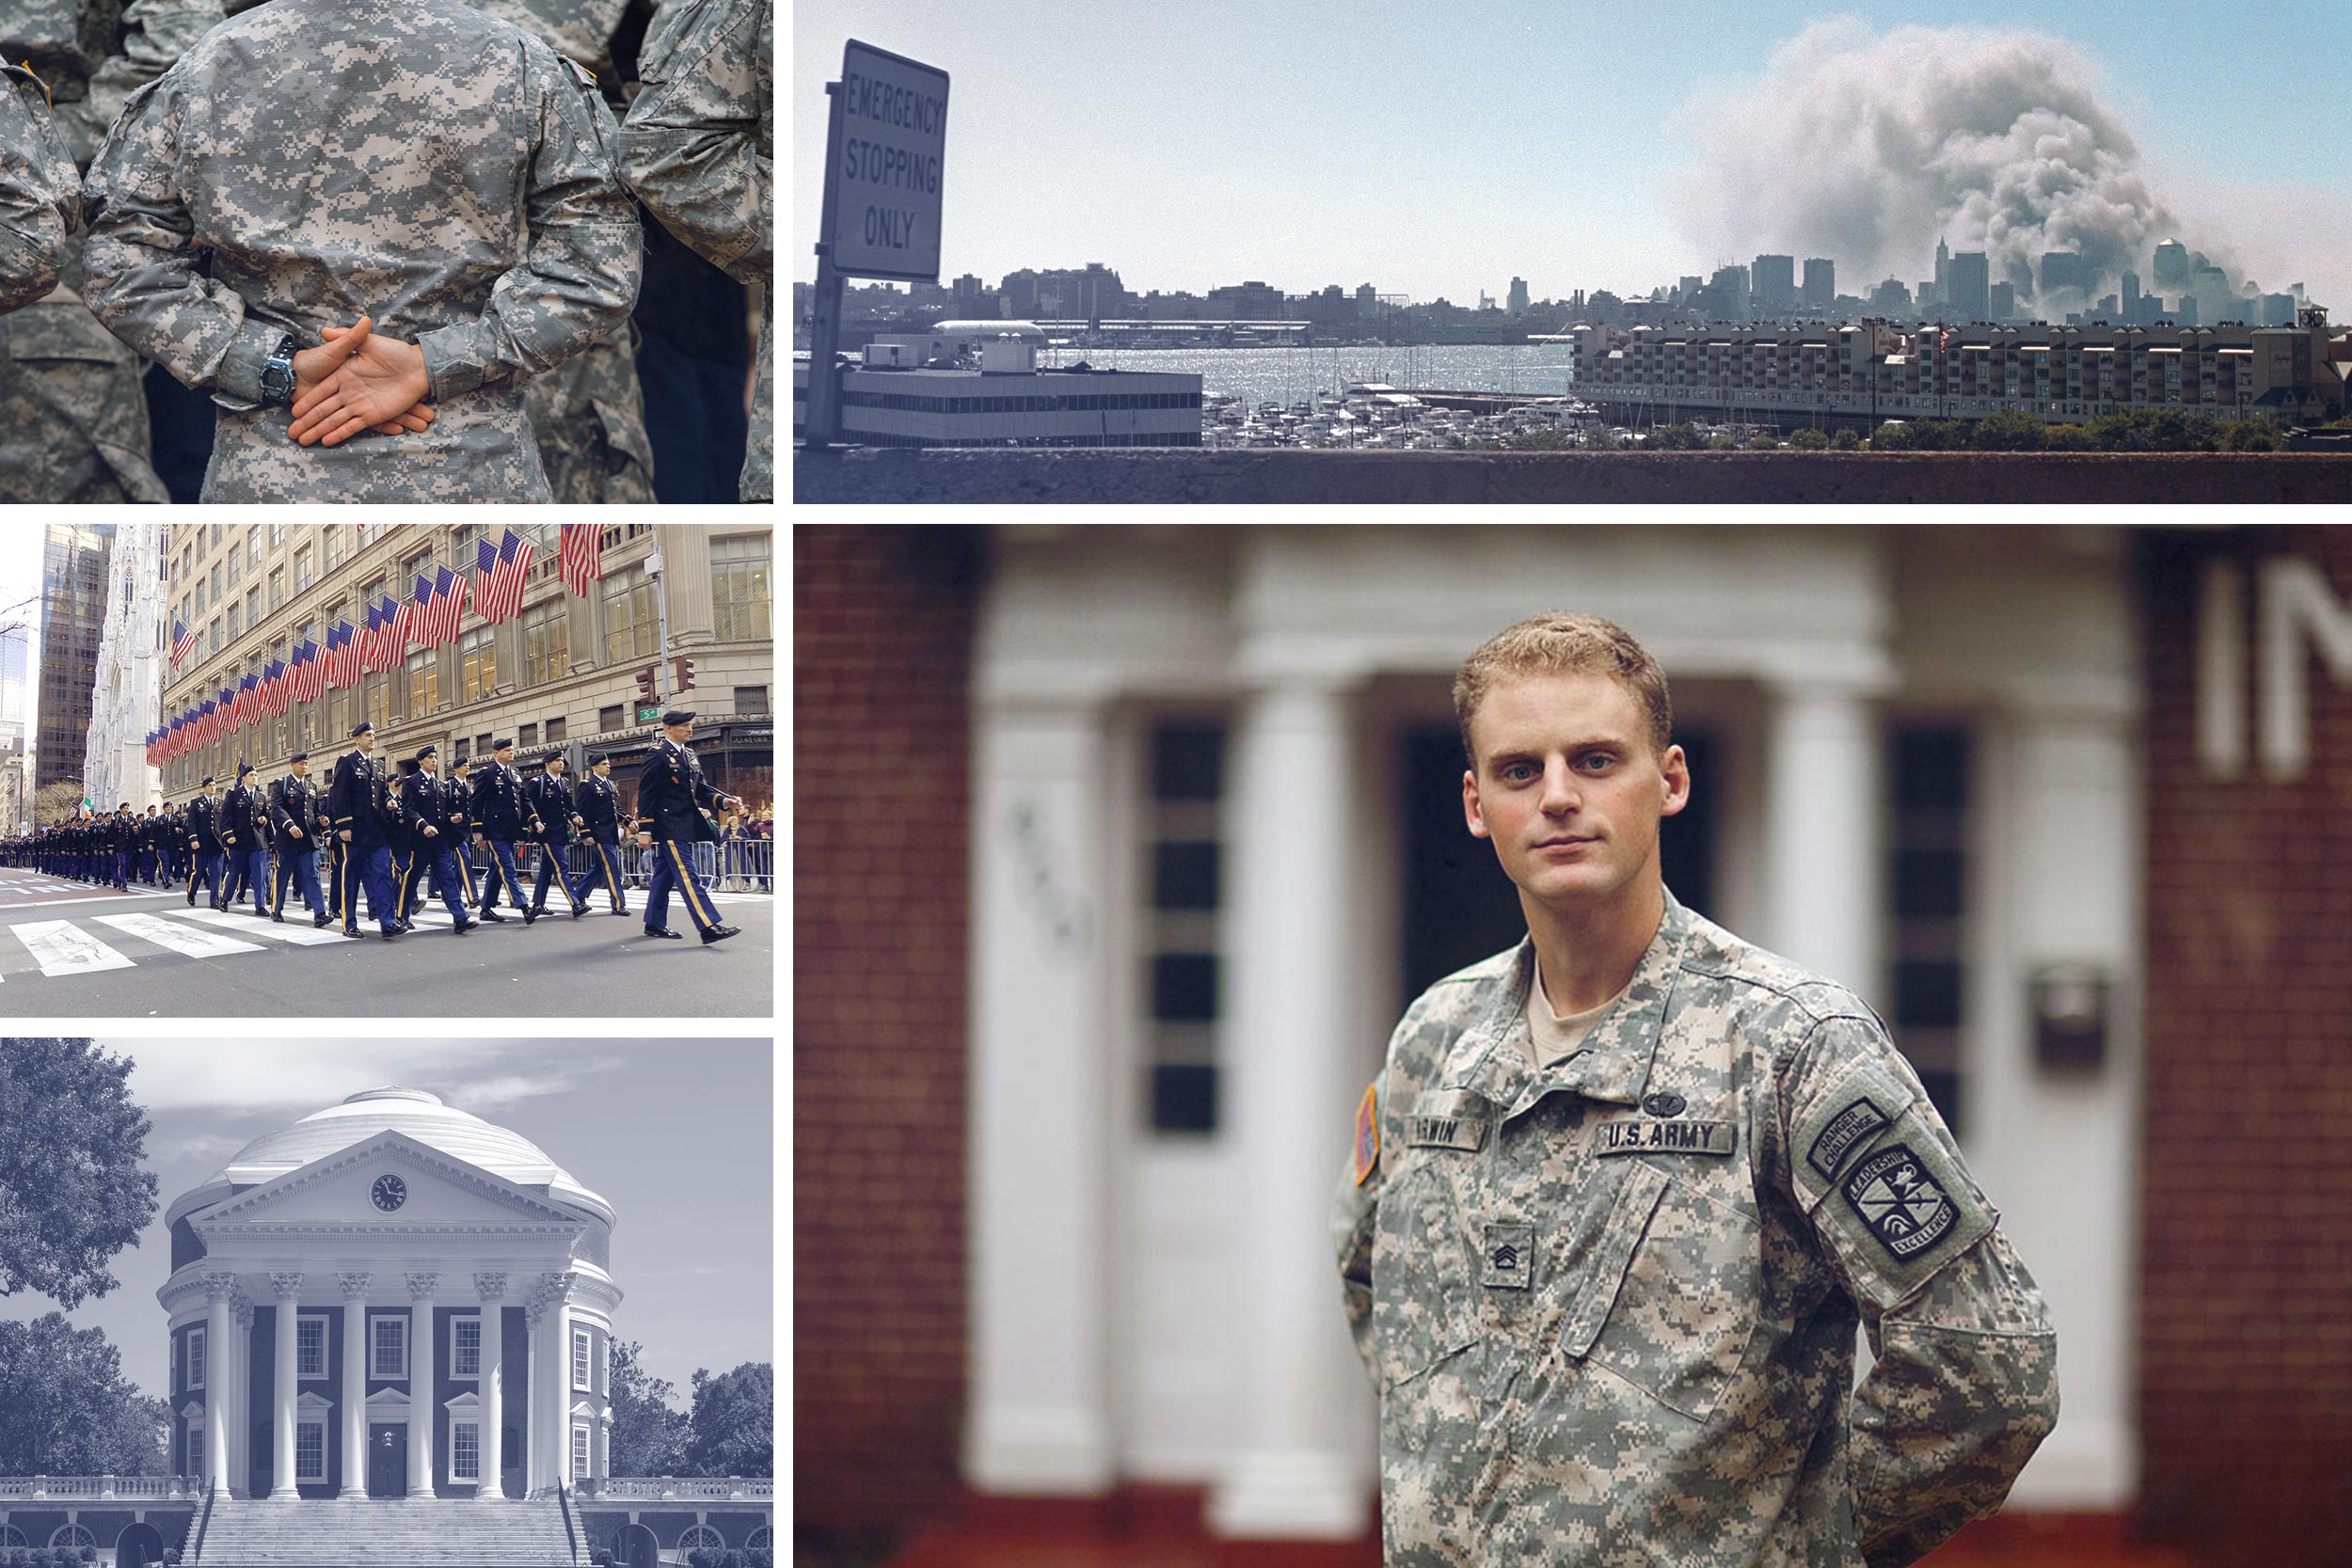 Collage of photos: top left:  service members in formation at ease middle left: 69th infantry walking down New yorks streets bottom left: Rotunda top right: smoke from the Twin Towers bottom right: US service man looking at the camera